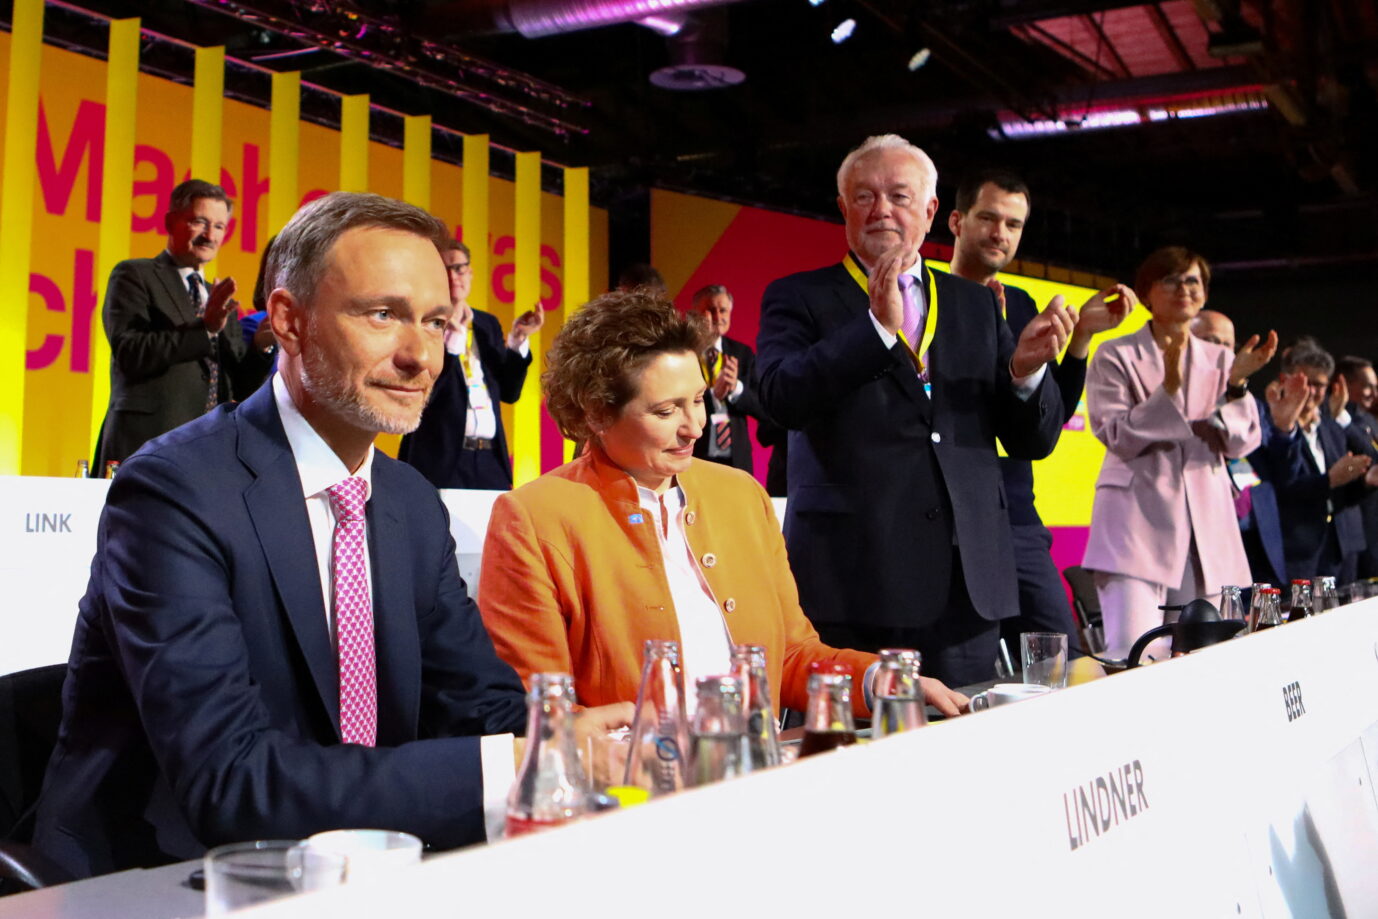 Germany's Free Democratic Party (FDP) leader Christian Lindner is applauded next to Deputy federal chairwoman of Free Democratic Party (FDP) Nicola Beer, FDP's Wolfgang Kubicki and Johannes Vogel during the 74th ordinary party convention in Berlin, Germany, April 21, 2023. REUTERS/Nadja Wohlleben